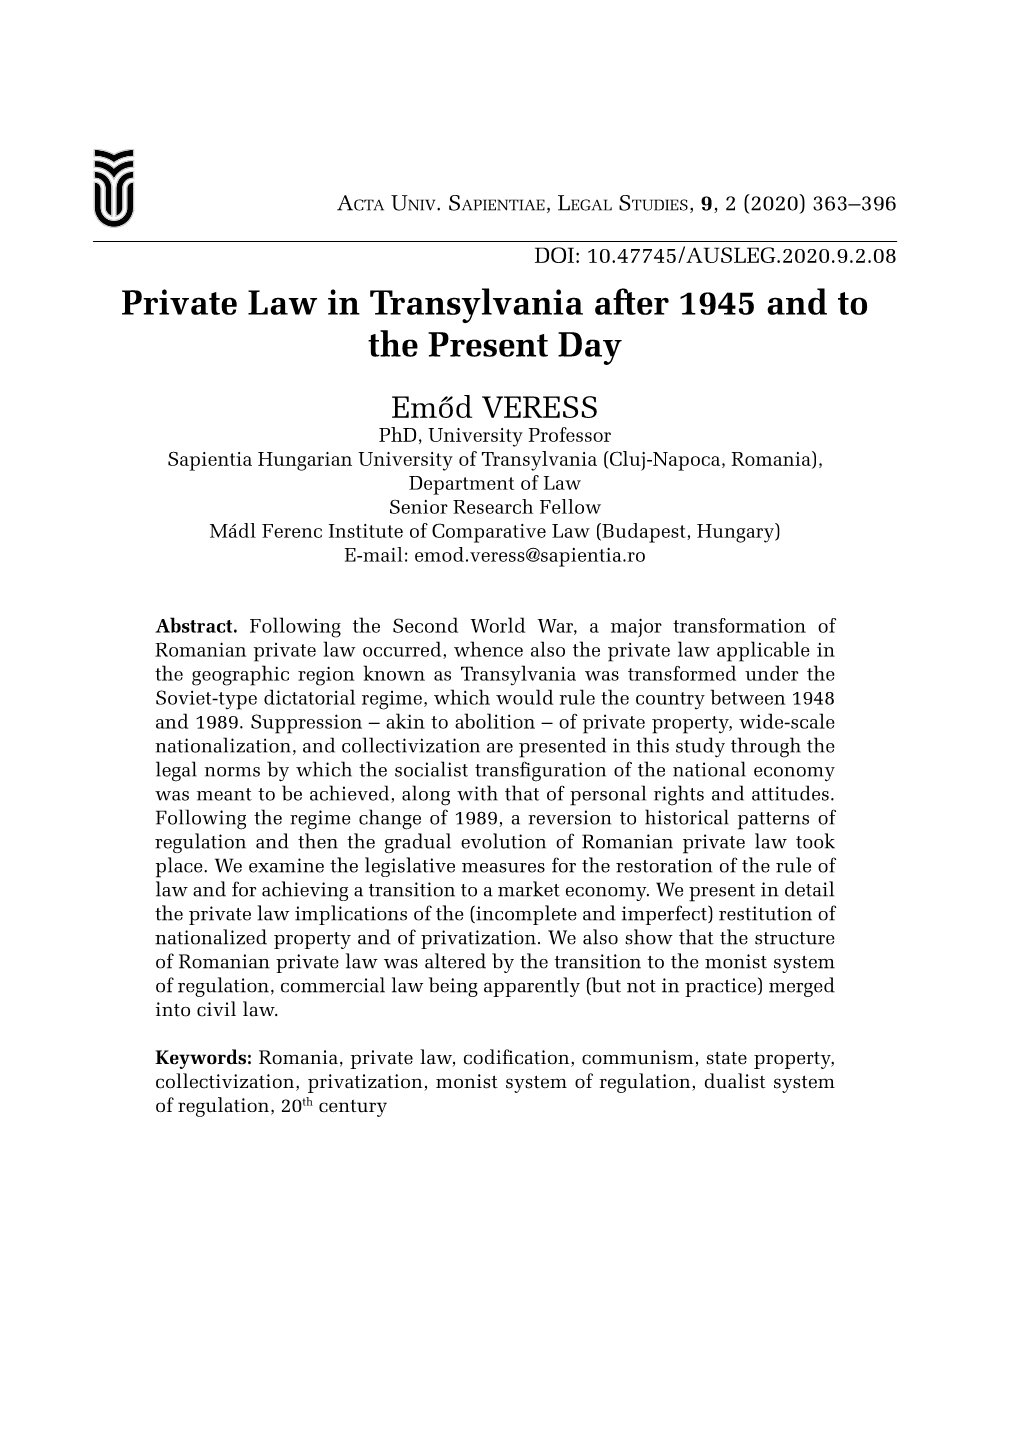 Private Law in Transylvania After 1945 and to the Present